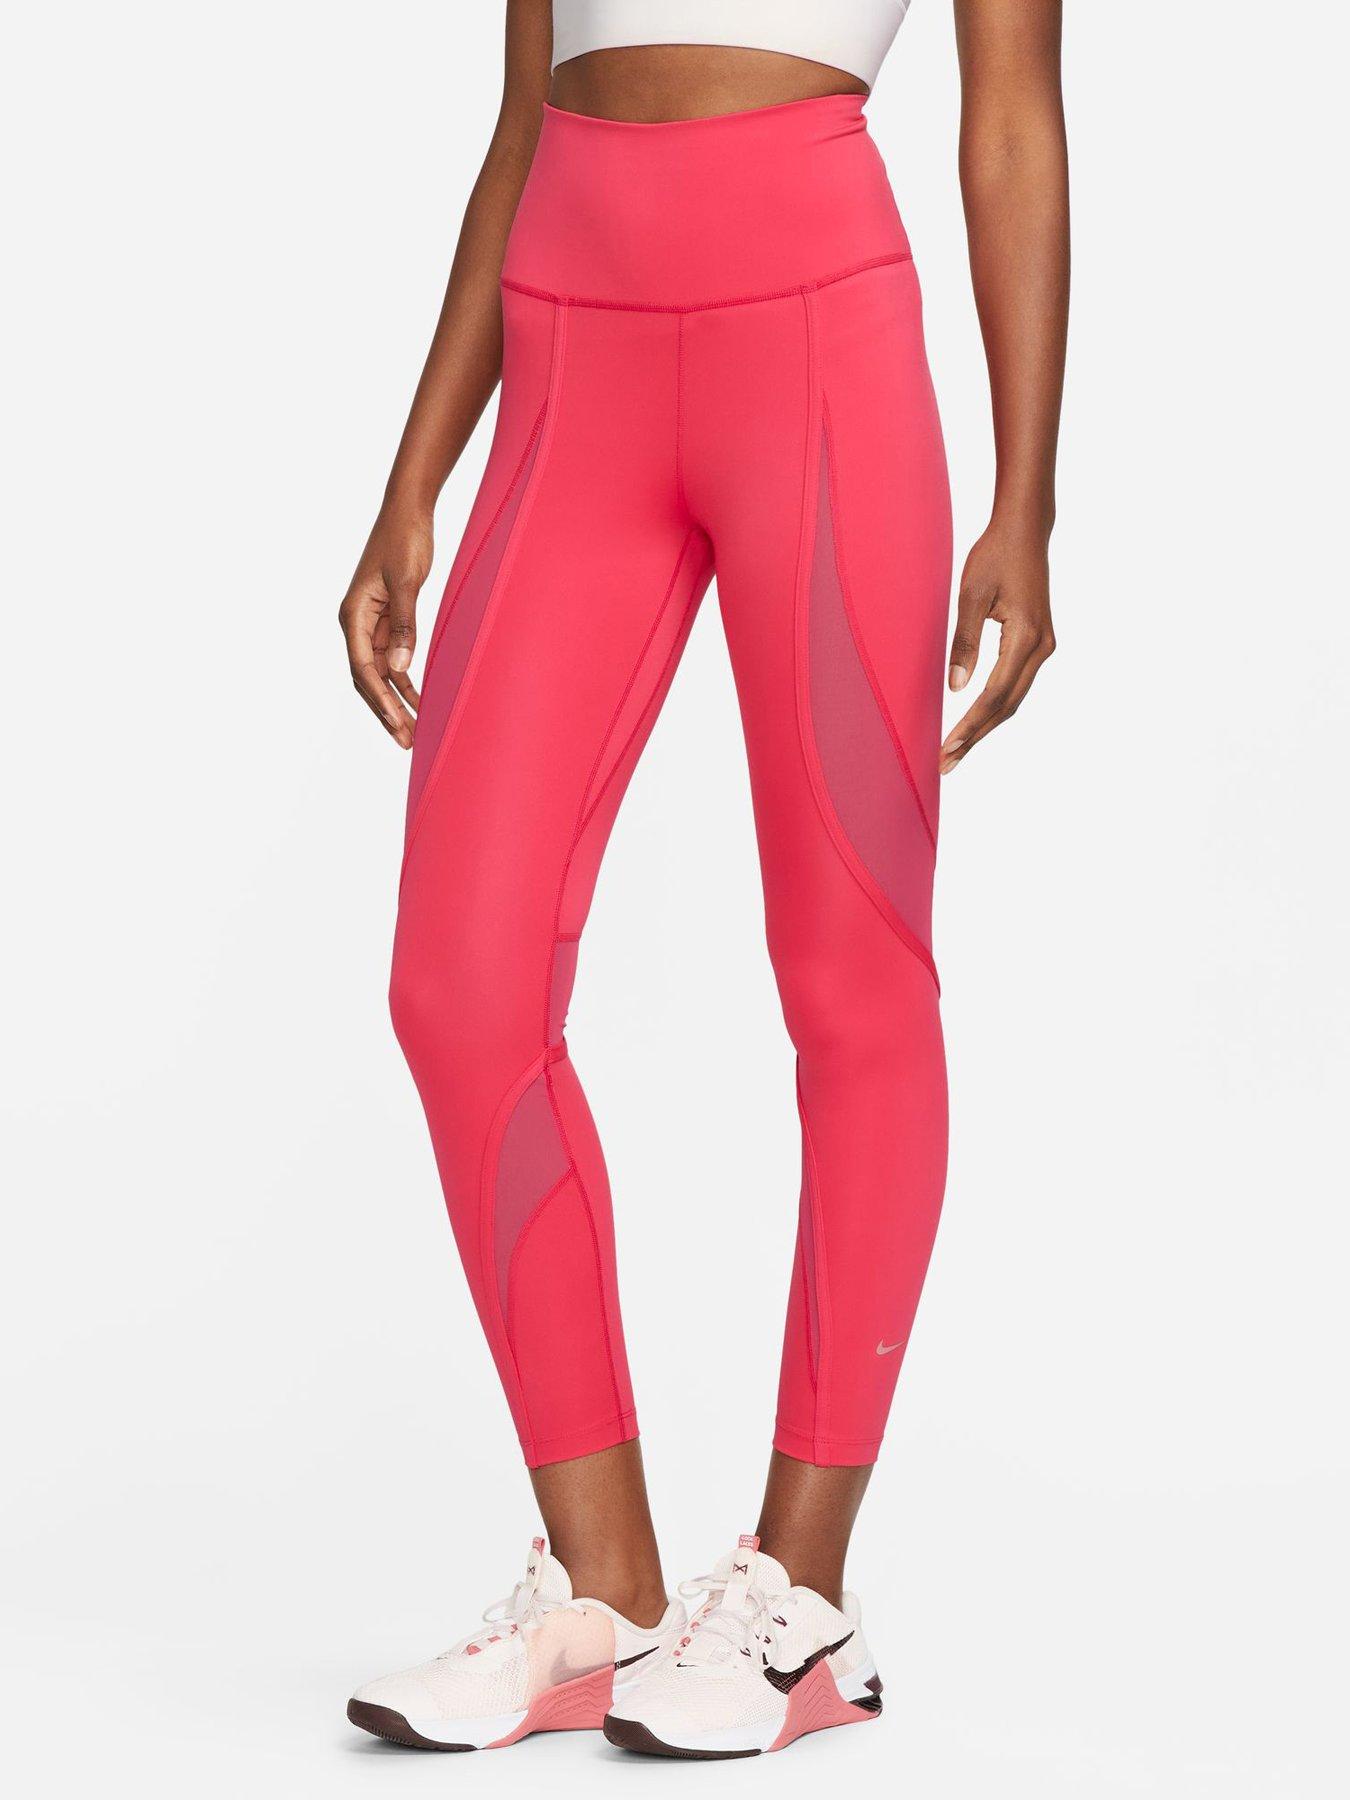 Clearance, Tights & leggings, Womens sports clothing, Sports & leisure, Nike